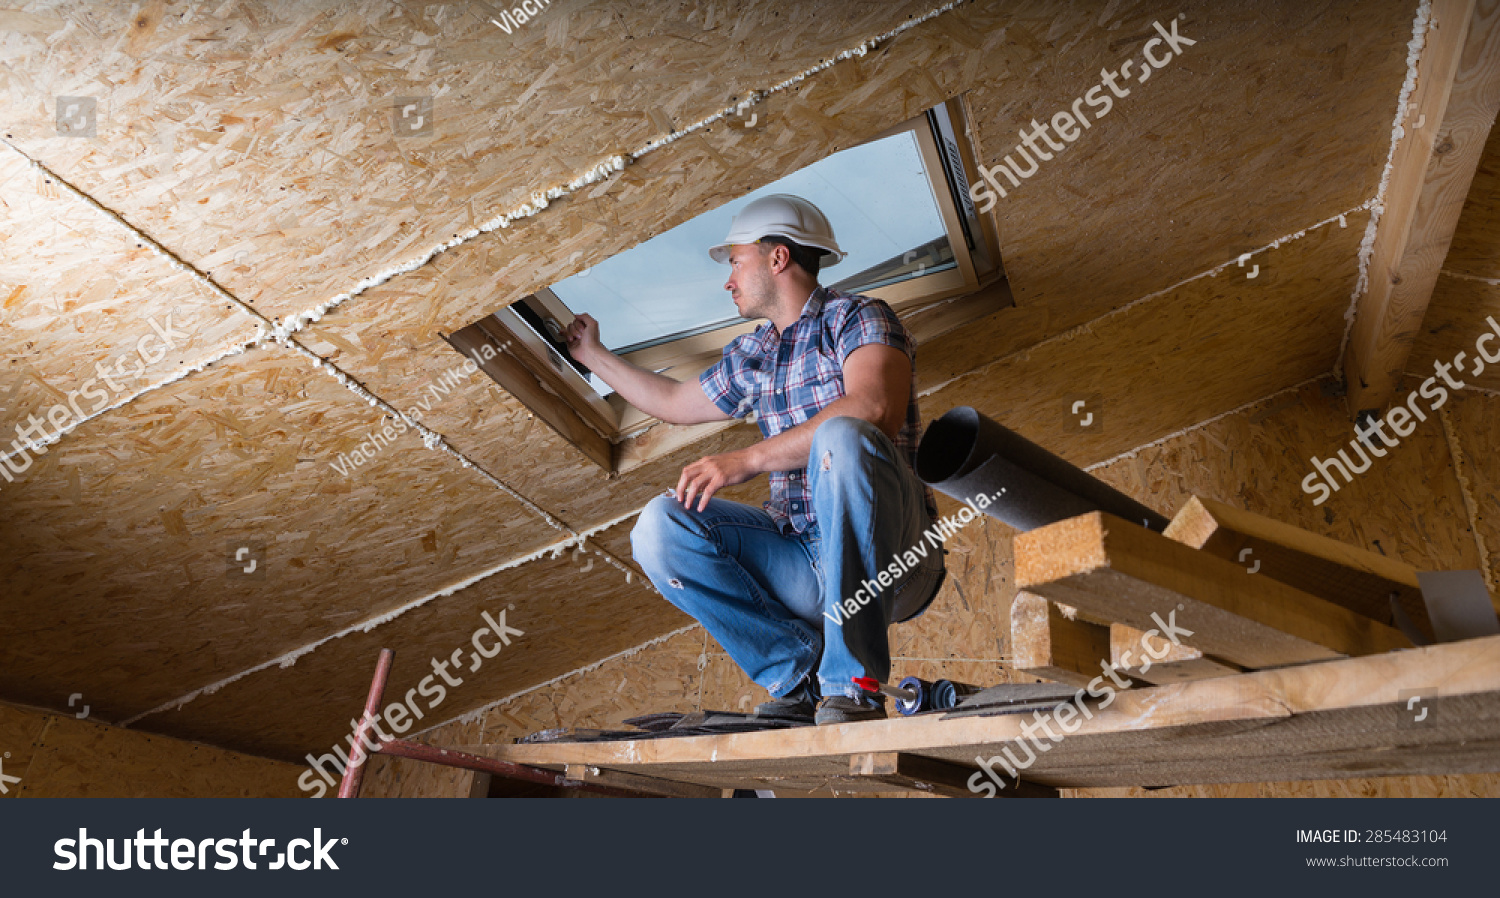 Low Angle View of Male Construction Worker Builder Crouching on Elevated Scaffolding near Ceiling and Inspecting Frame of Sky Light Window in Unfinished House with Exposed Particle Plywood Board #285483104